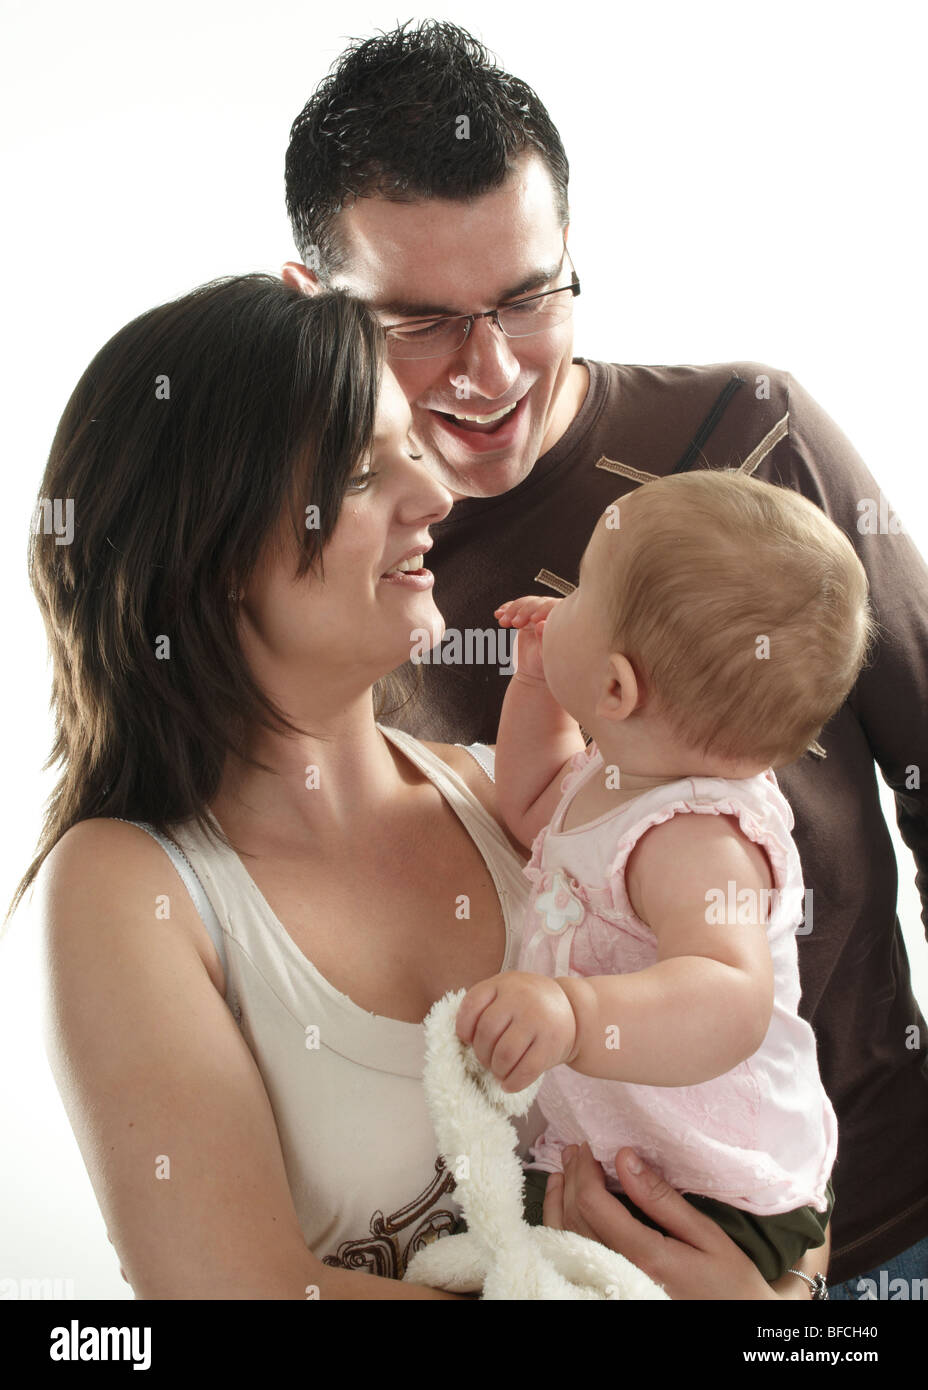 family portrait of mum, dad and baby girl Stock Photo